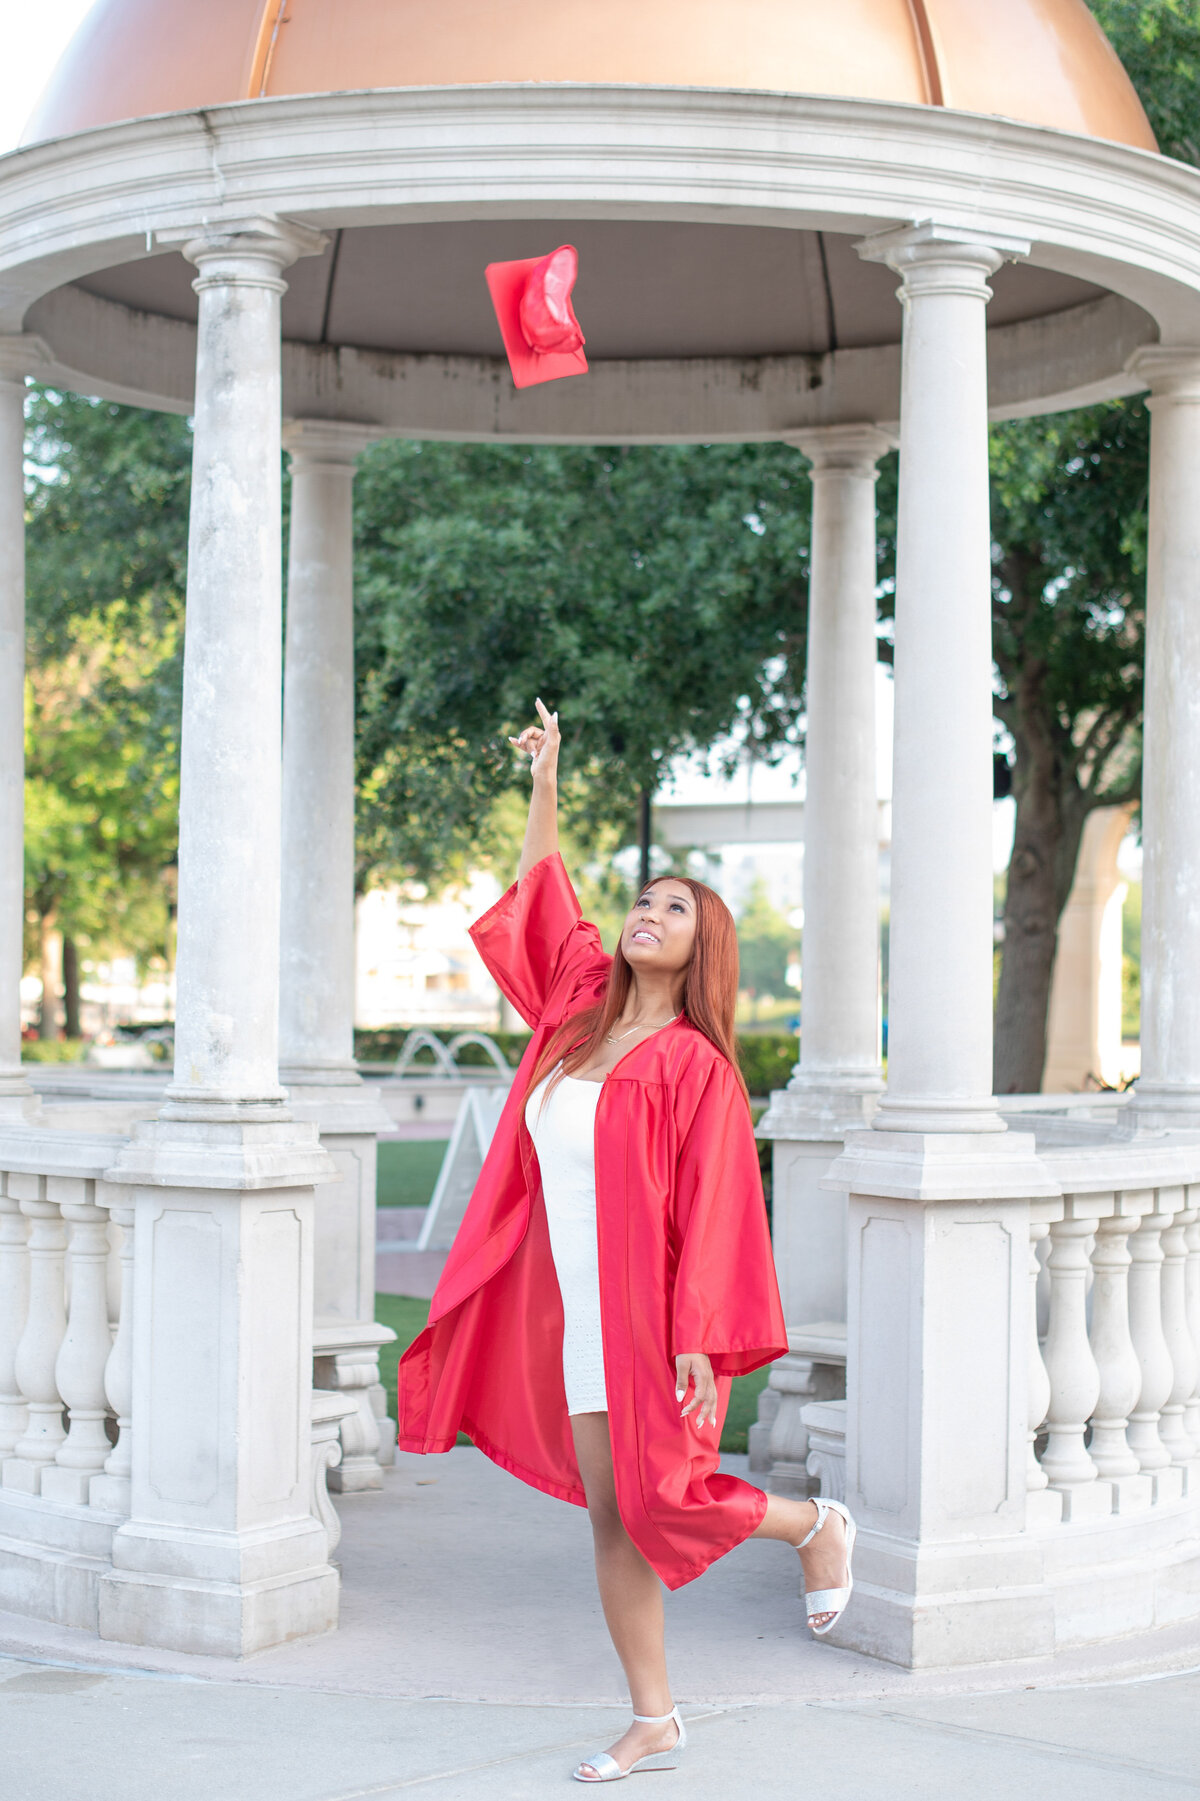 High school senior girl in gown throwing cap into the air.